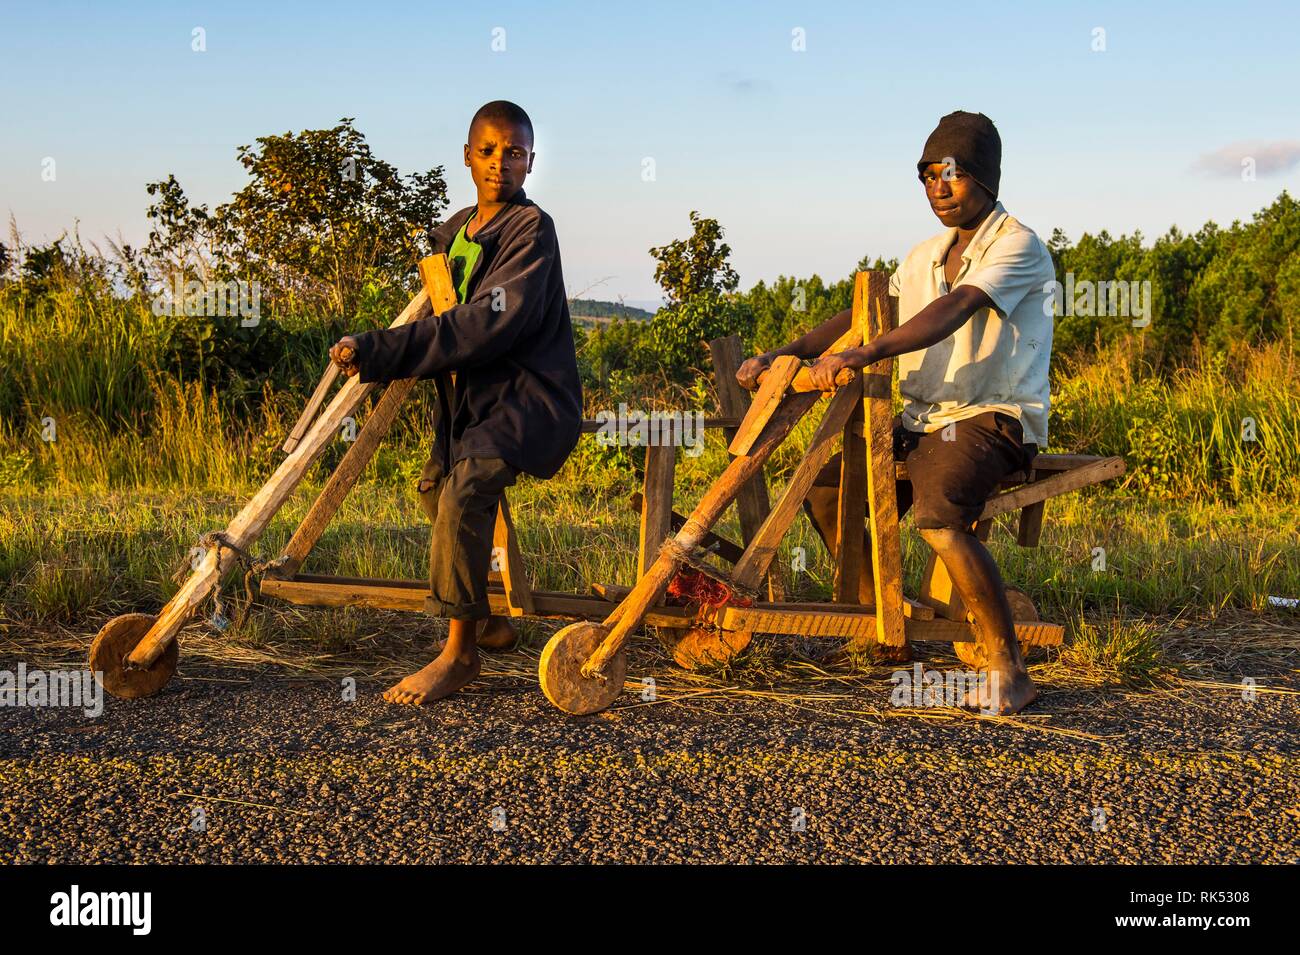 Local boys on their self made bicycles, Malawi, Africa Stock Photo